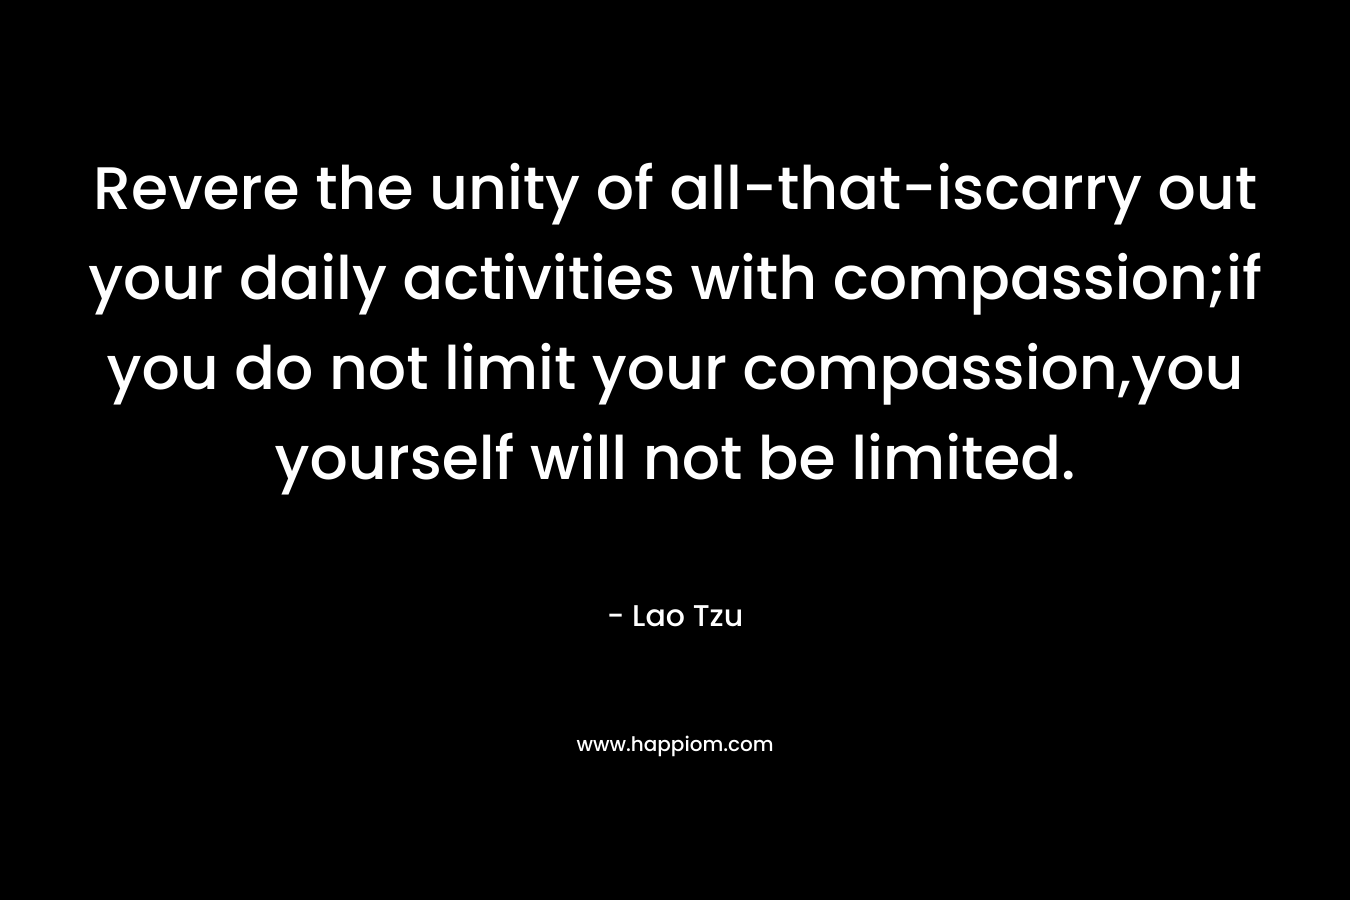 Revere the unity of all-that-iscarry out your daily activities with compassion;if you do not limit your compassion,you yourself will not be limited. – Lao Tzu